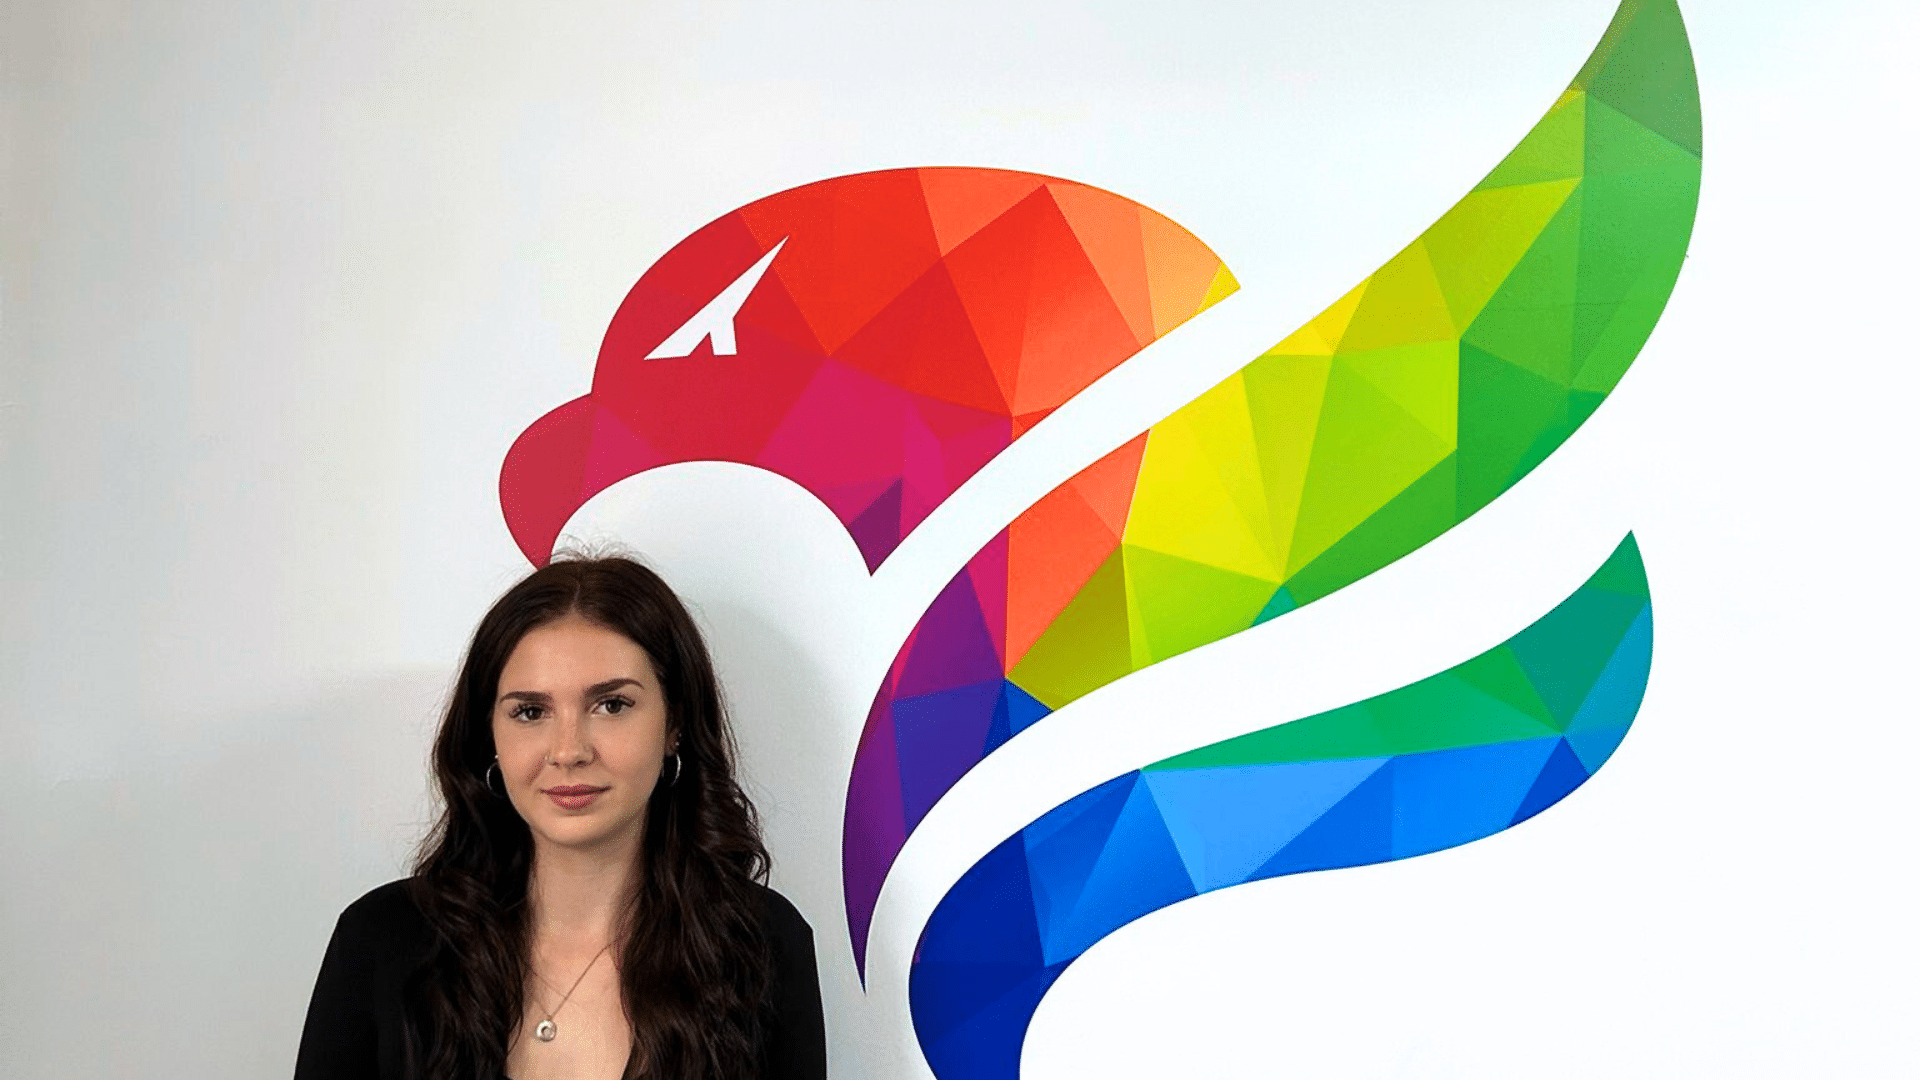 Falcon Digital welcomes Millie Barrett to the team